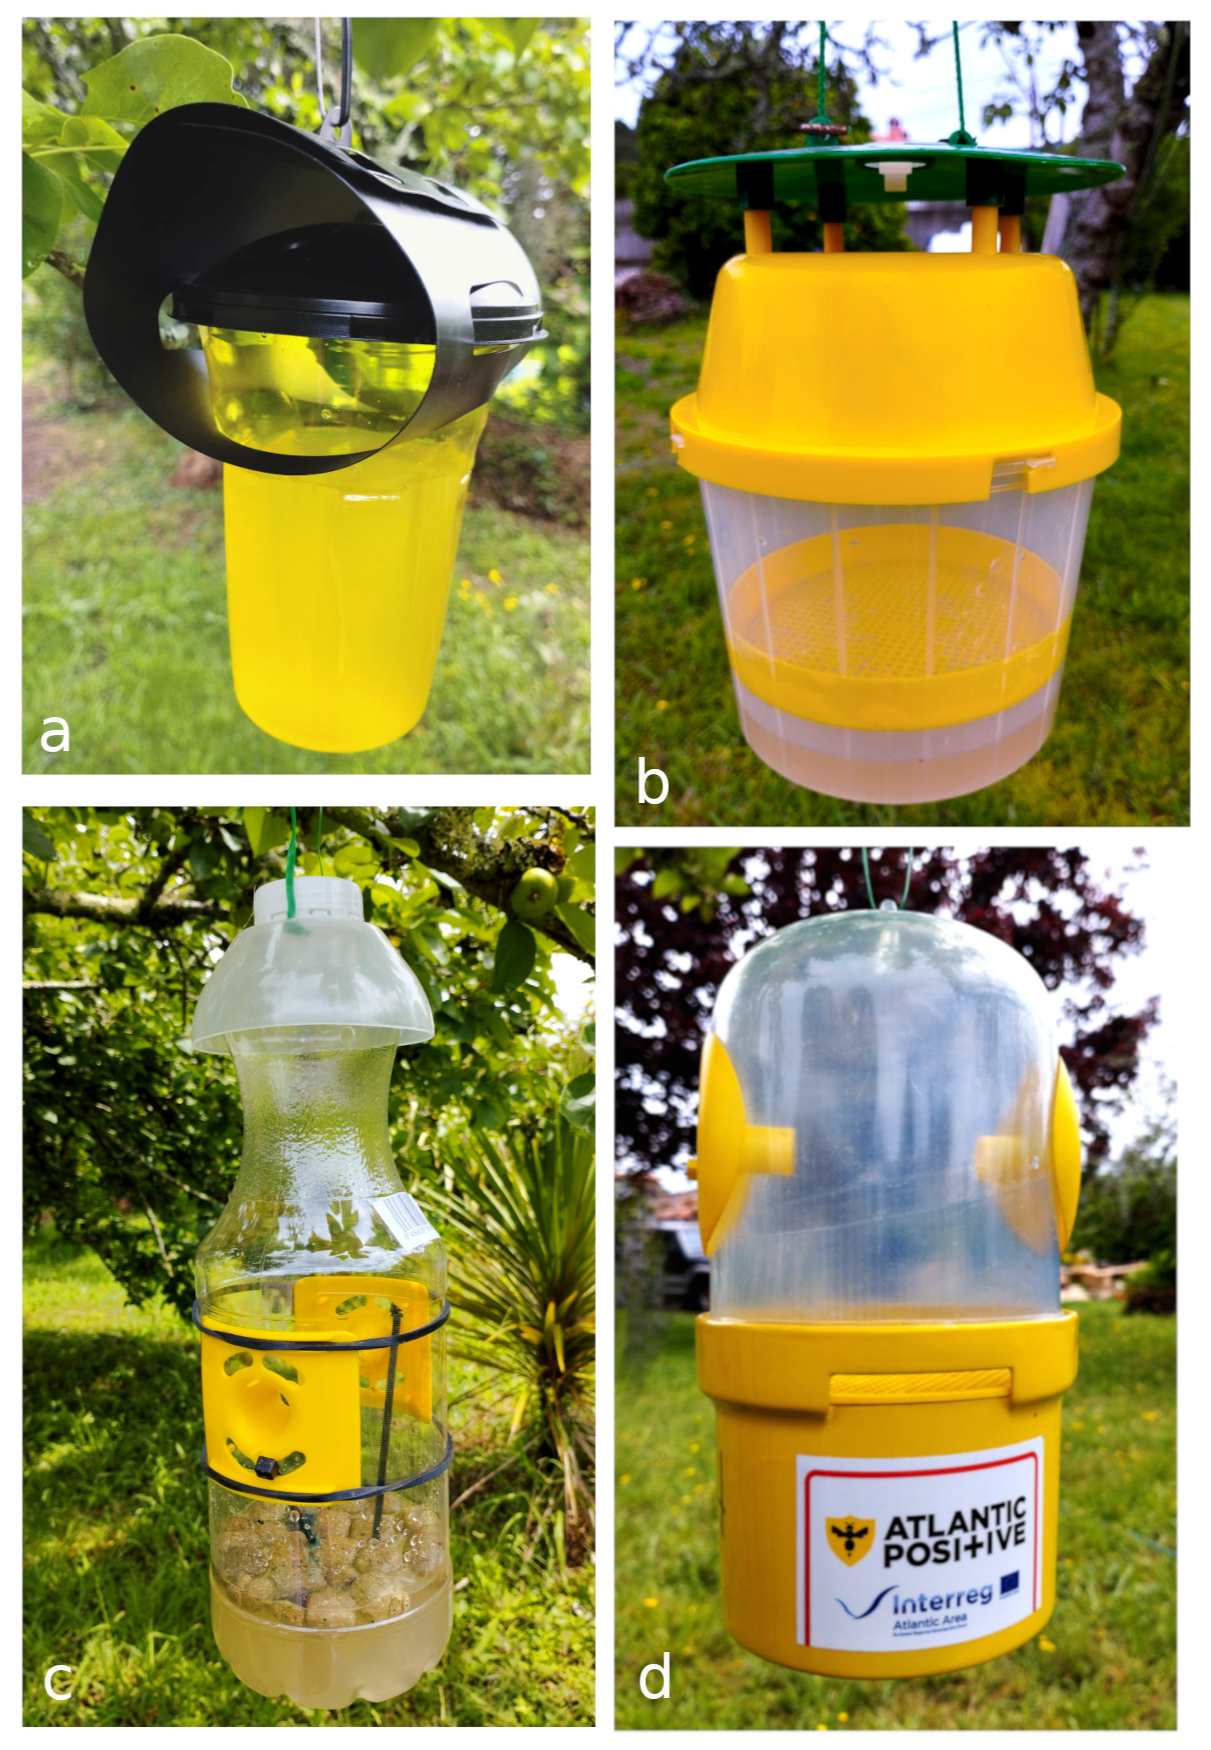 Animals | Free Full-Text | Comparison of Effectiveness and Selectiveness of  Baited Traps for the Capture of the Invasive Hornet Vespa velutina